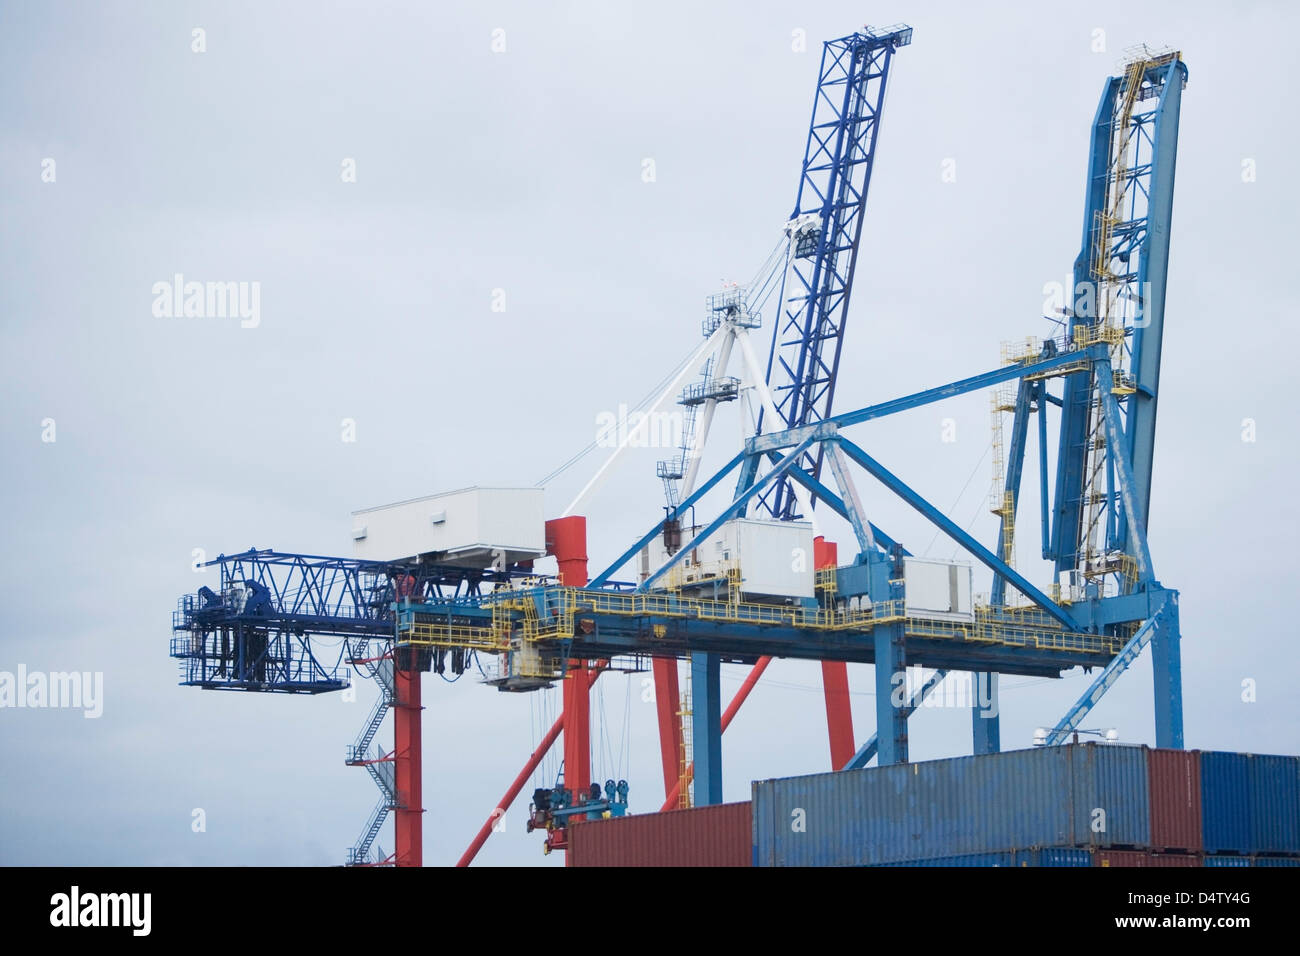 Crane and containers on loading dock Stock Photo